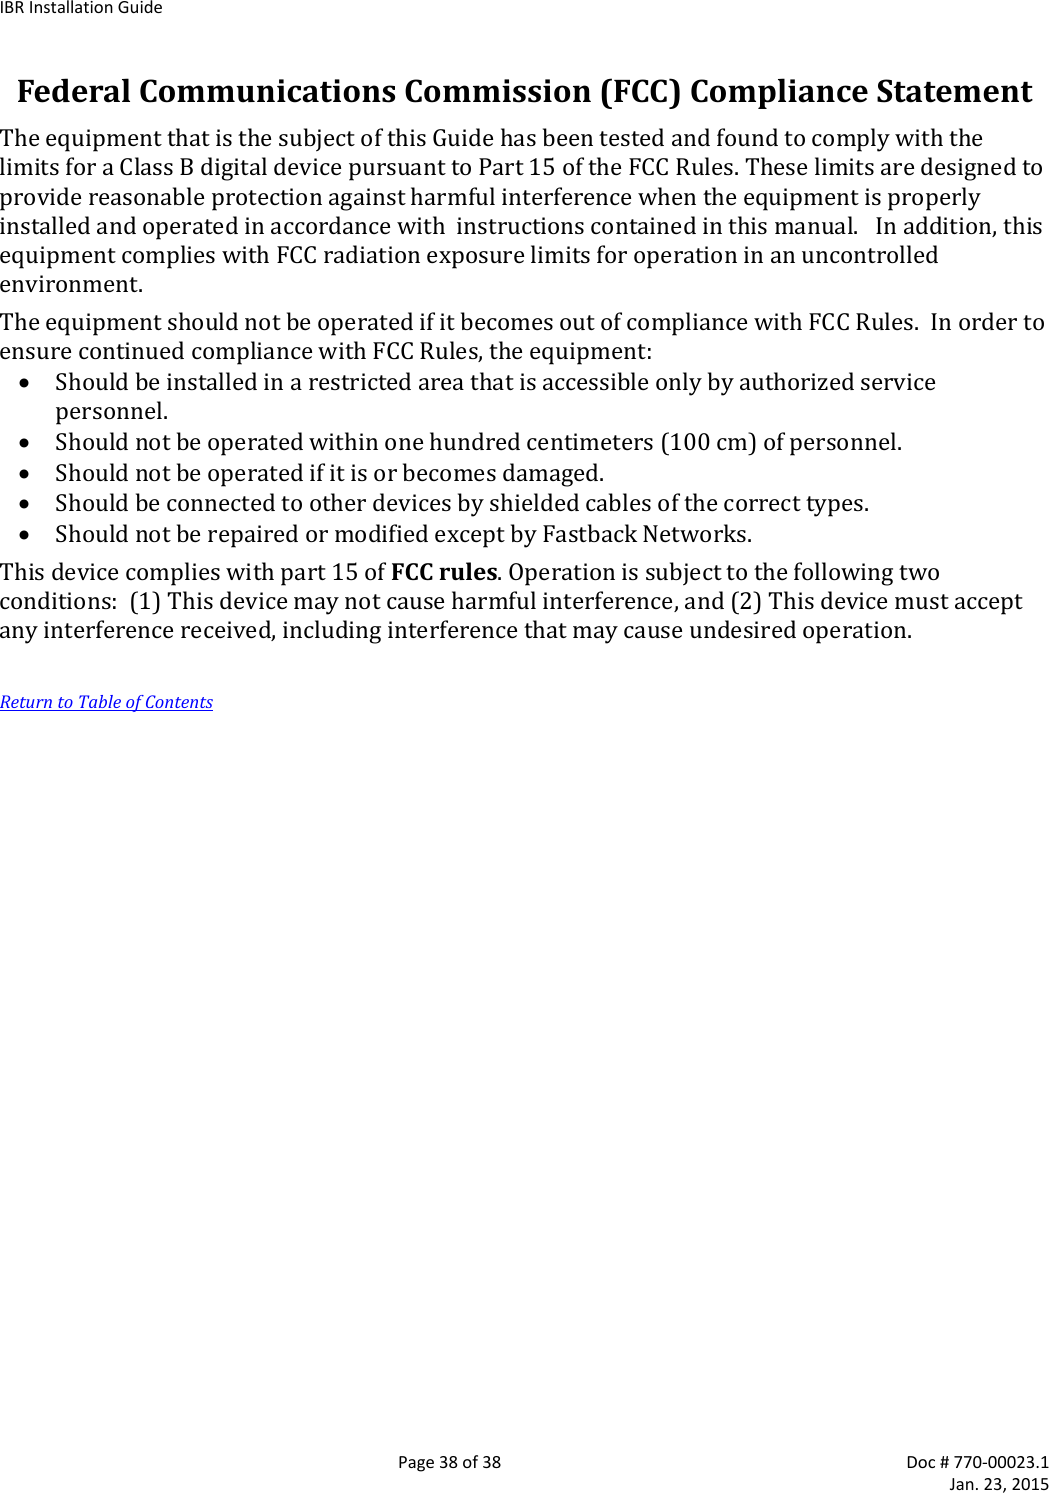 IBR Installation Guide   Page 38 of 38  Doc # 770-00023.1     Jan. 23, 2015 Federal Communications Commission (FCC) Compliance Statement The equipment that is the subject of this Guide has been tested and found to comply with the limits for a Class B digital device pursuant to Part 15 of the FCC Rules. These limits are designed to provide reasonable protection against harmful interference when the equipment is properly installed and operated in accordance with  instructions contained in this manual.   In addition, this equipment complies with FCC radiation exposure limits for operation in an uncontrolled environment. The equipment should not be operated if it becomes out of compliance with FCC Rules.  In order to ensure continued compliance with FCC Rules, the equipment:  Should be installed in a restricted area that is accessible only by authorized service personnel.  Should not be operated within one hundred centimeters (100 cm) of personnel.  Should not be operated if it is or becomes damaged.  Should be connected to other devices by shielded cables of the correct types.  Should not be repaired or modified except by Fastback Networks. This device complies with part 15 of FCC rules. Operation is subject to the following two conditions:  (1) This device may not cause harmful interference, and (2) This device must accept any interference received, including interference that may cause undesired operation.  Return to Table of Contents 